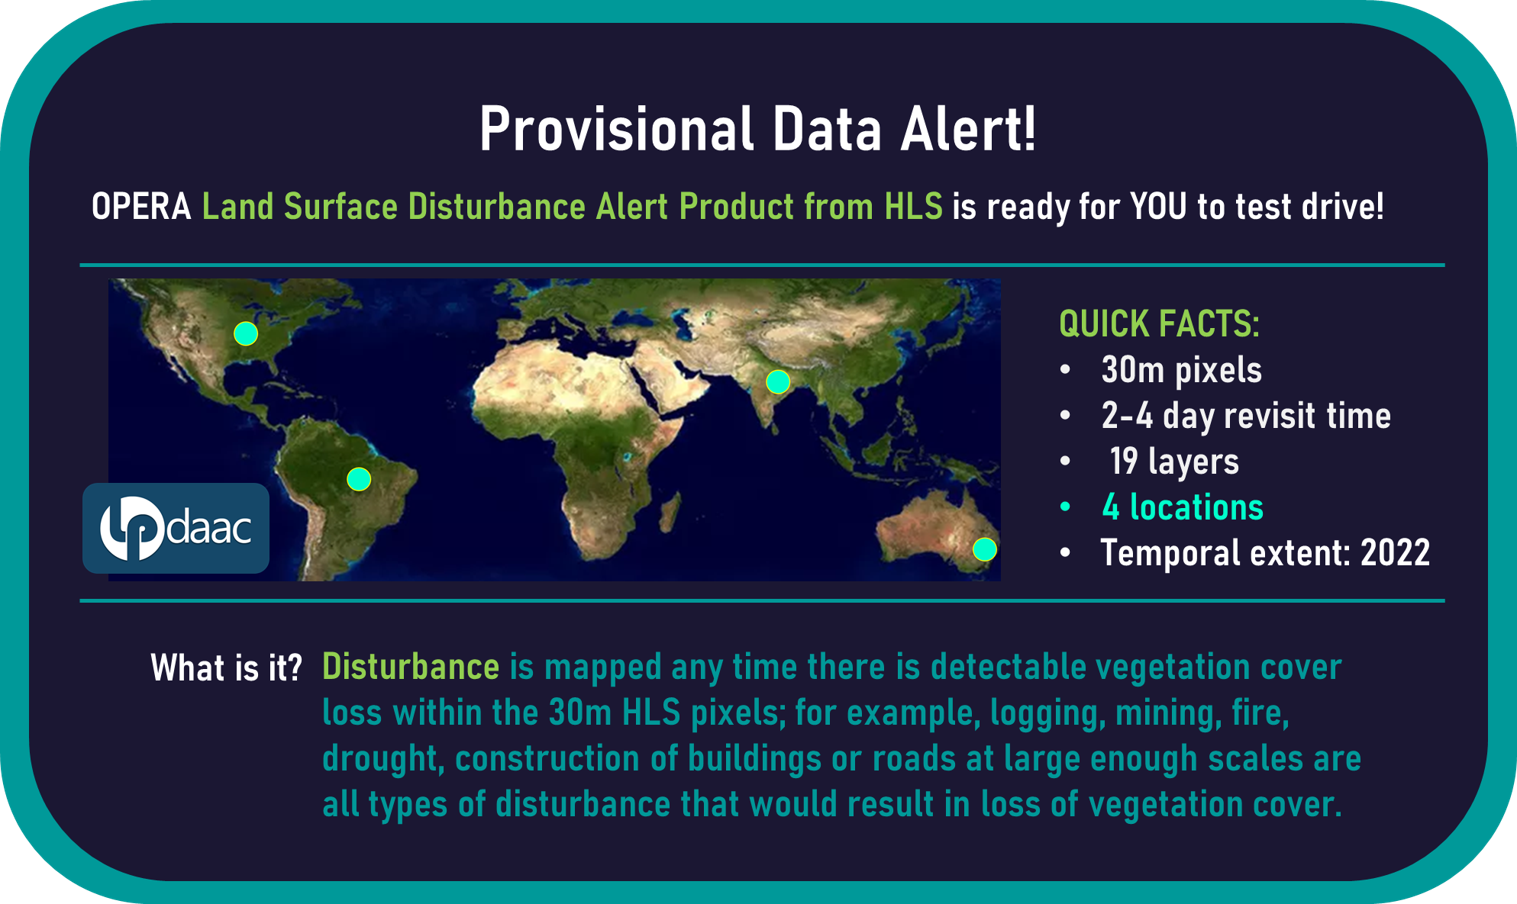 Image shows a global map with dots indicating the four locations where Provisional Land Surface Disturbance data can be accessed (the United States, South America, India, and Australia). The image also provides quick facts about the dataset.